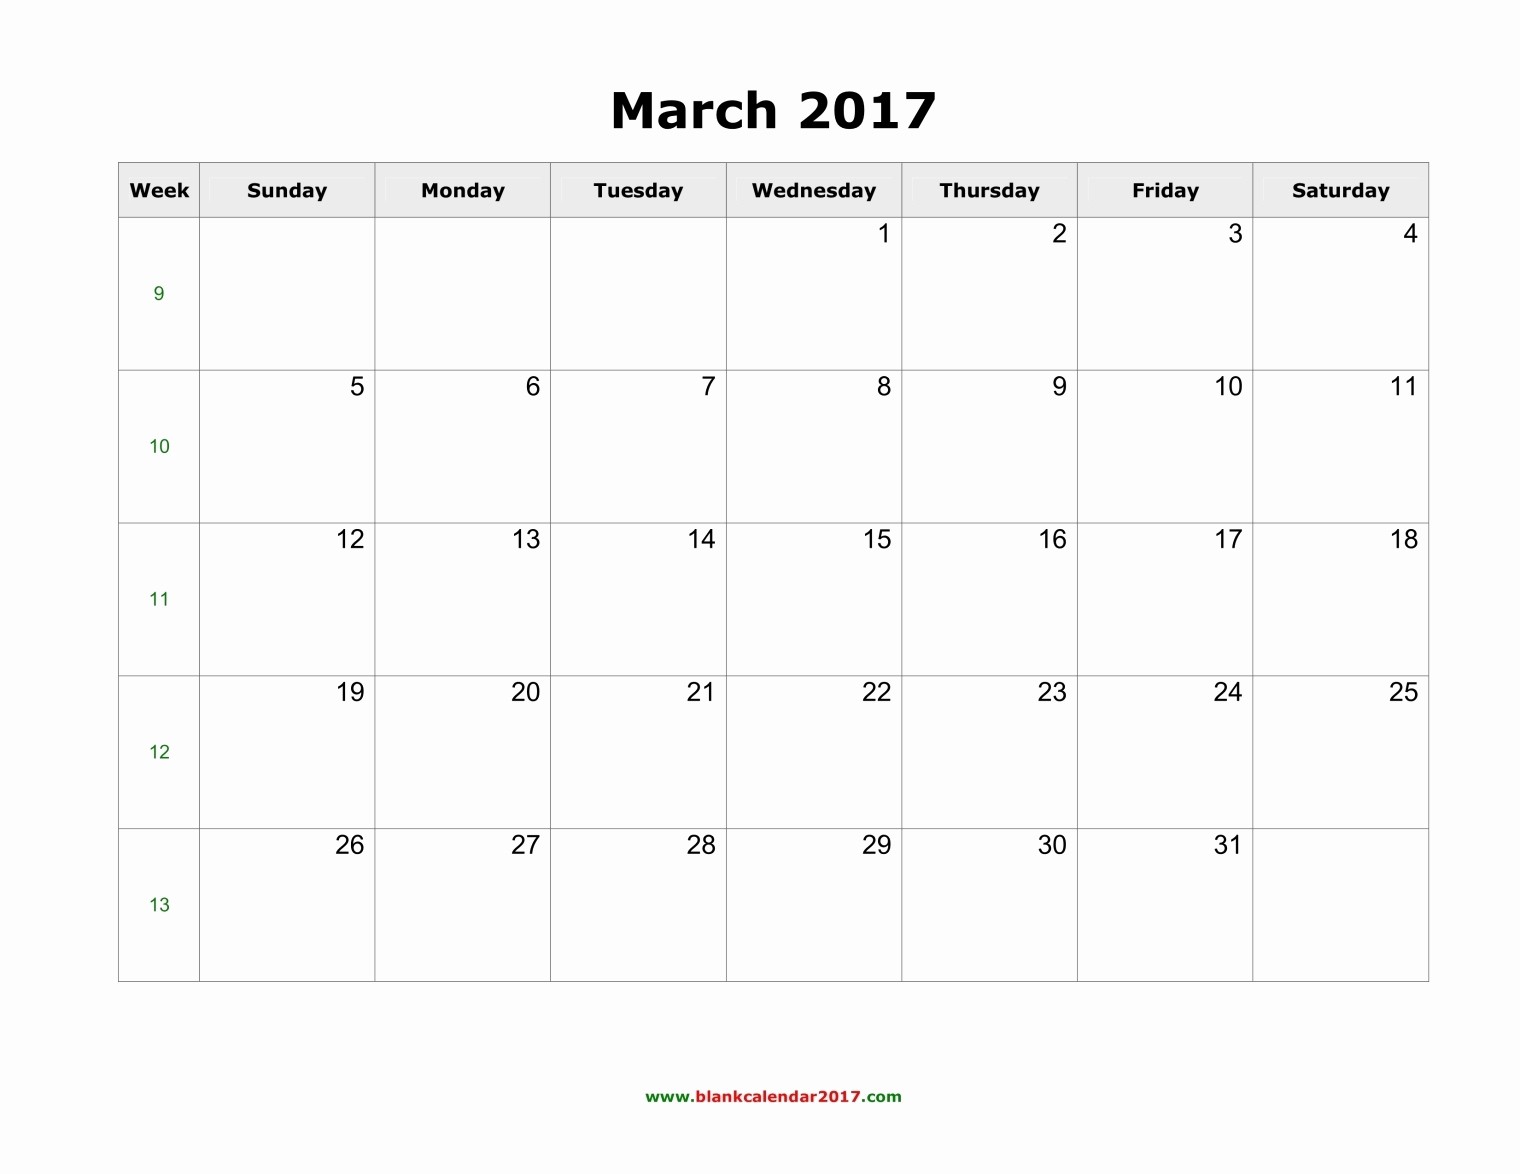 Calendar 2017 Template with Holidays Beautiful Blank Calendar for March 2017